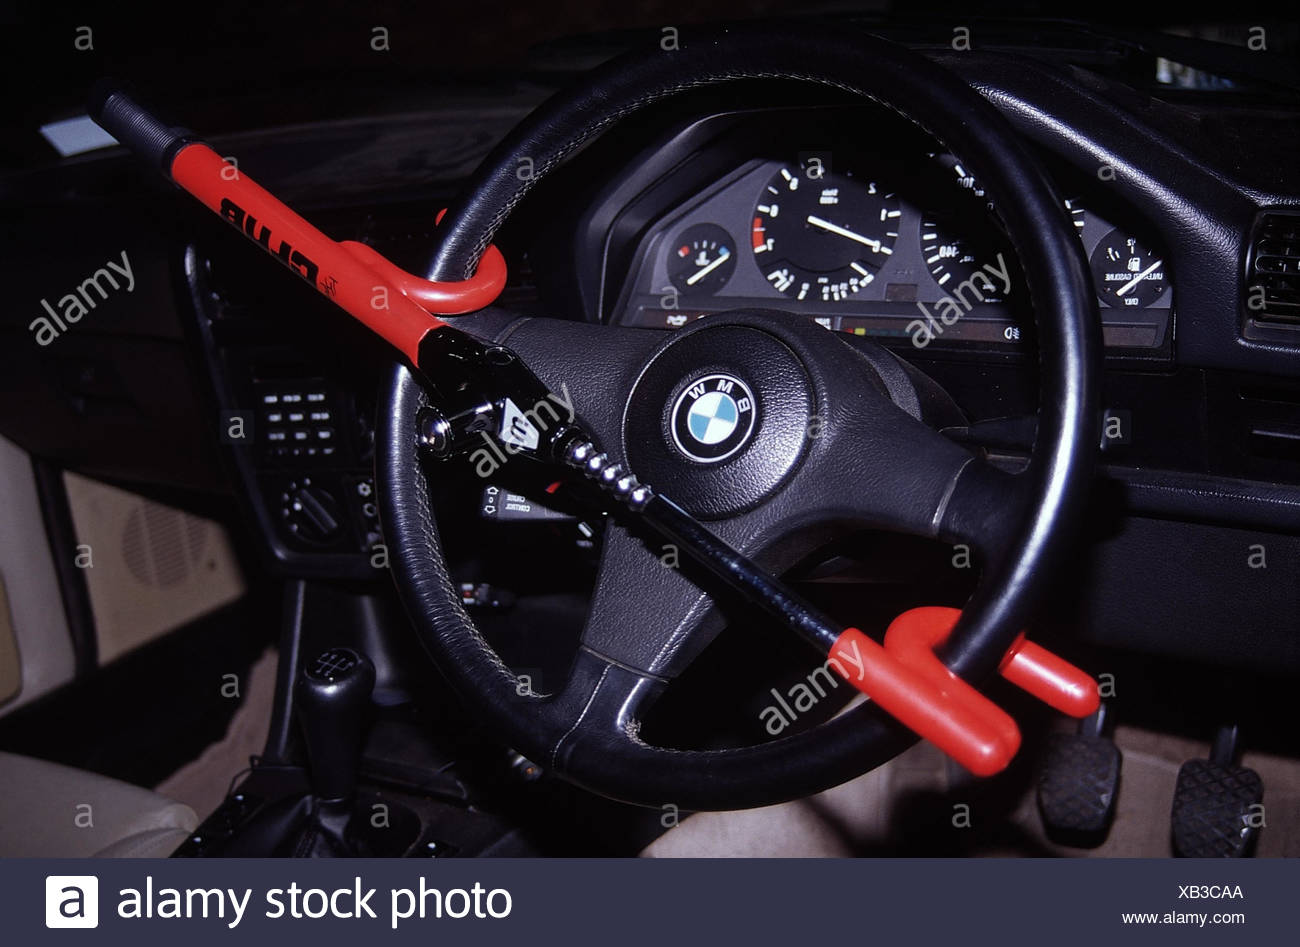 Car, detail, tax, anti-theft device, tax claw, steering lock, backup,  security, VEHICLE, BMW Stock Photo - Alamy